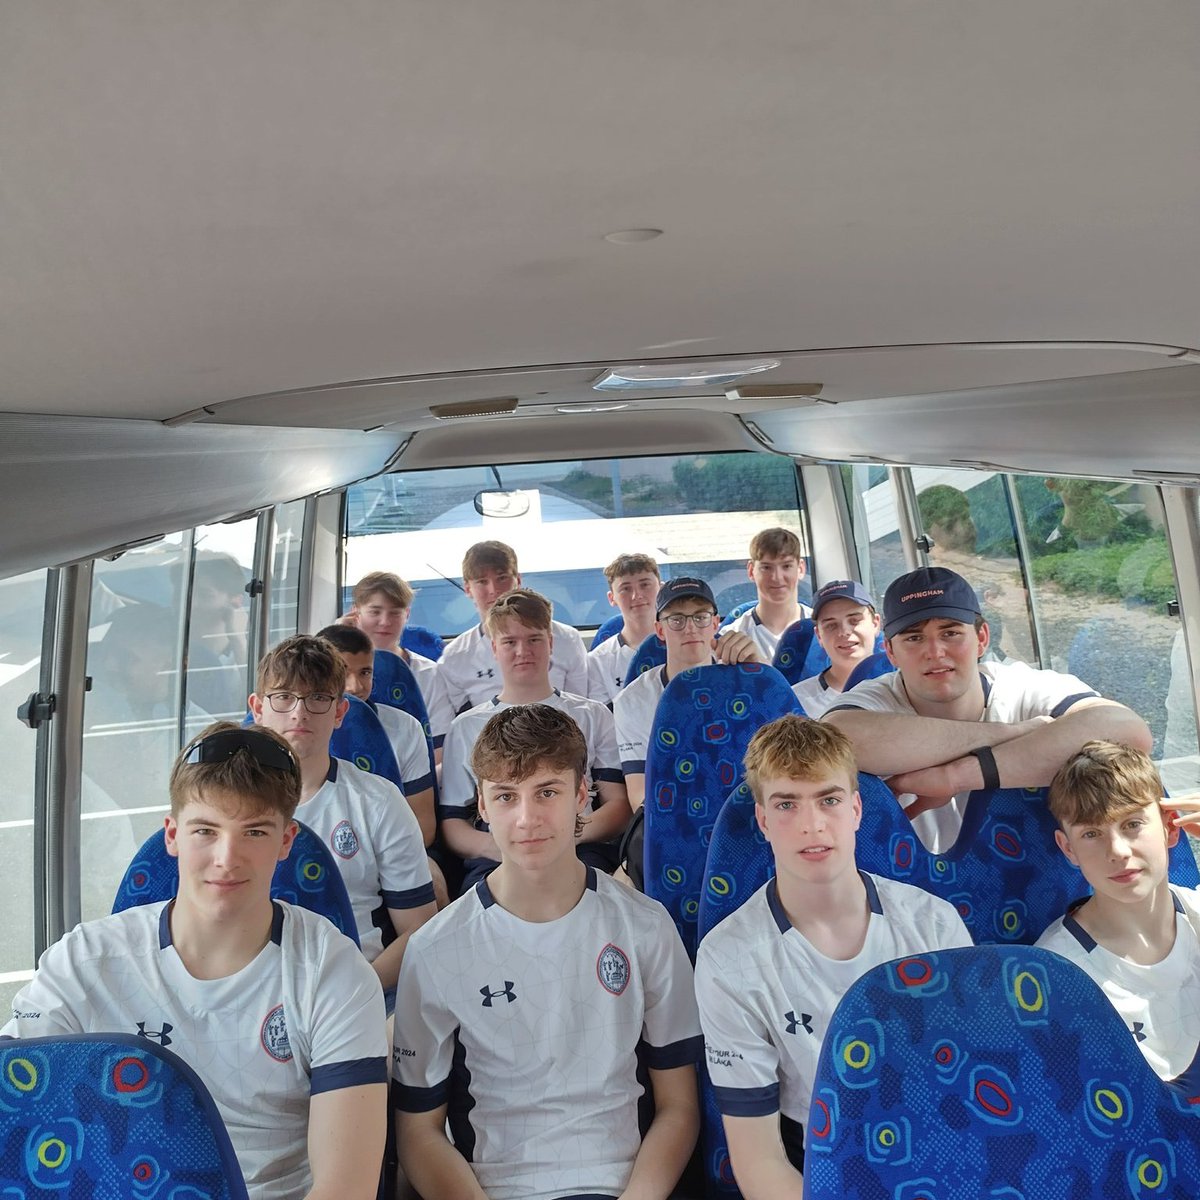 The Easter holidays may have begun, but there's still plenty going on in the #UppinghamCommunity! #UppinghamCricket have landed in Dubai for their tour of Sri Lanka and the UAE, #UppinghamLanguages are in Malaga, and @DofE pupils have begun their expeditions in North Wales.